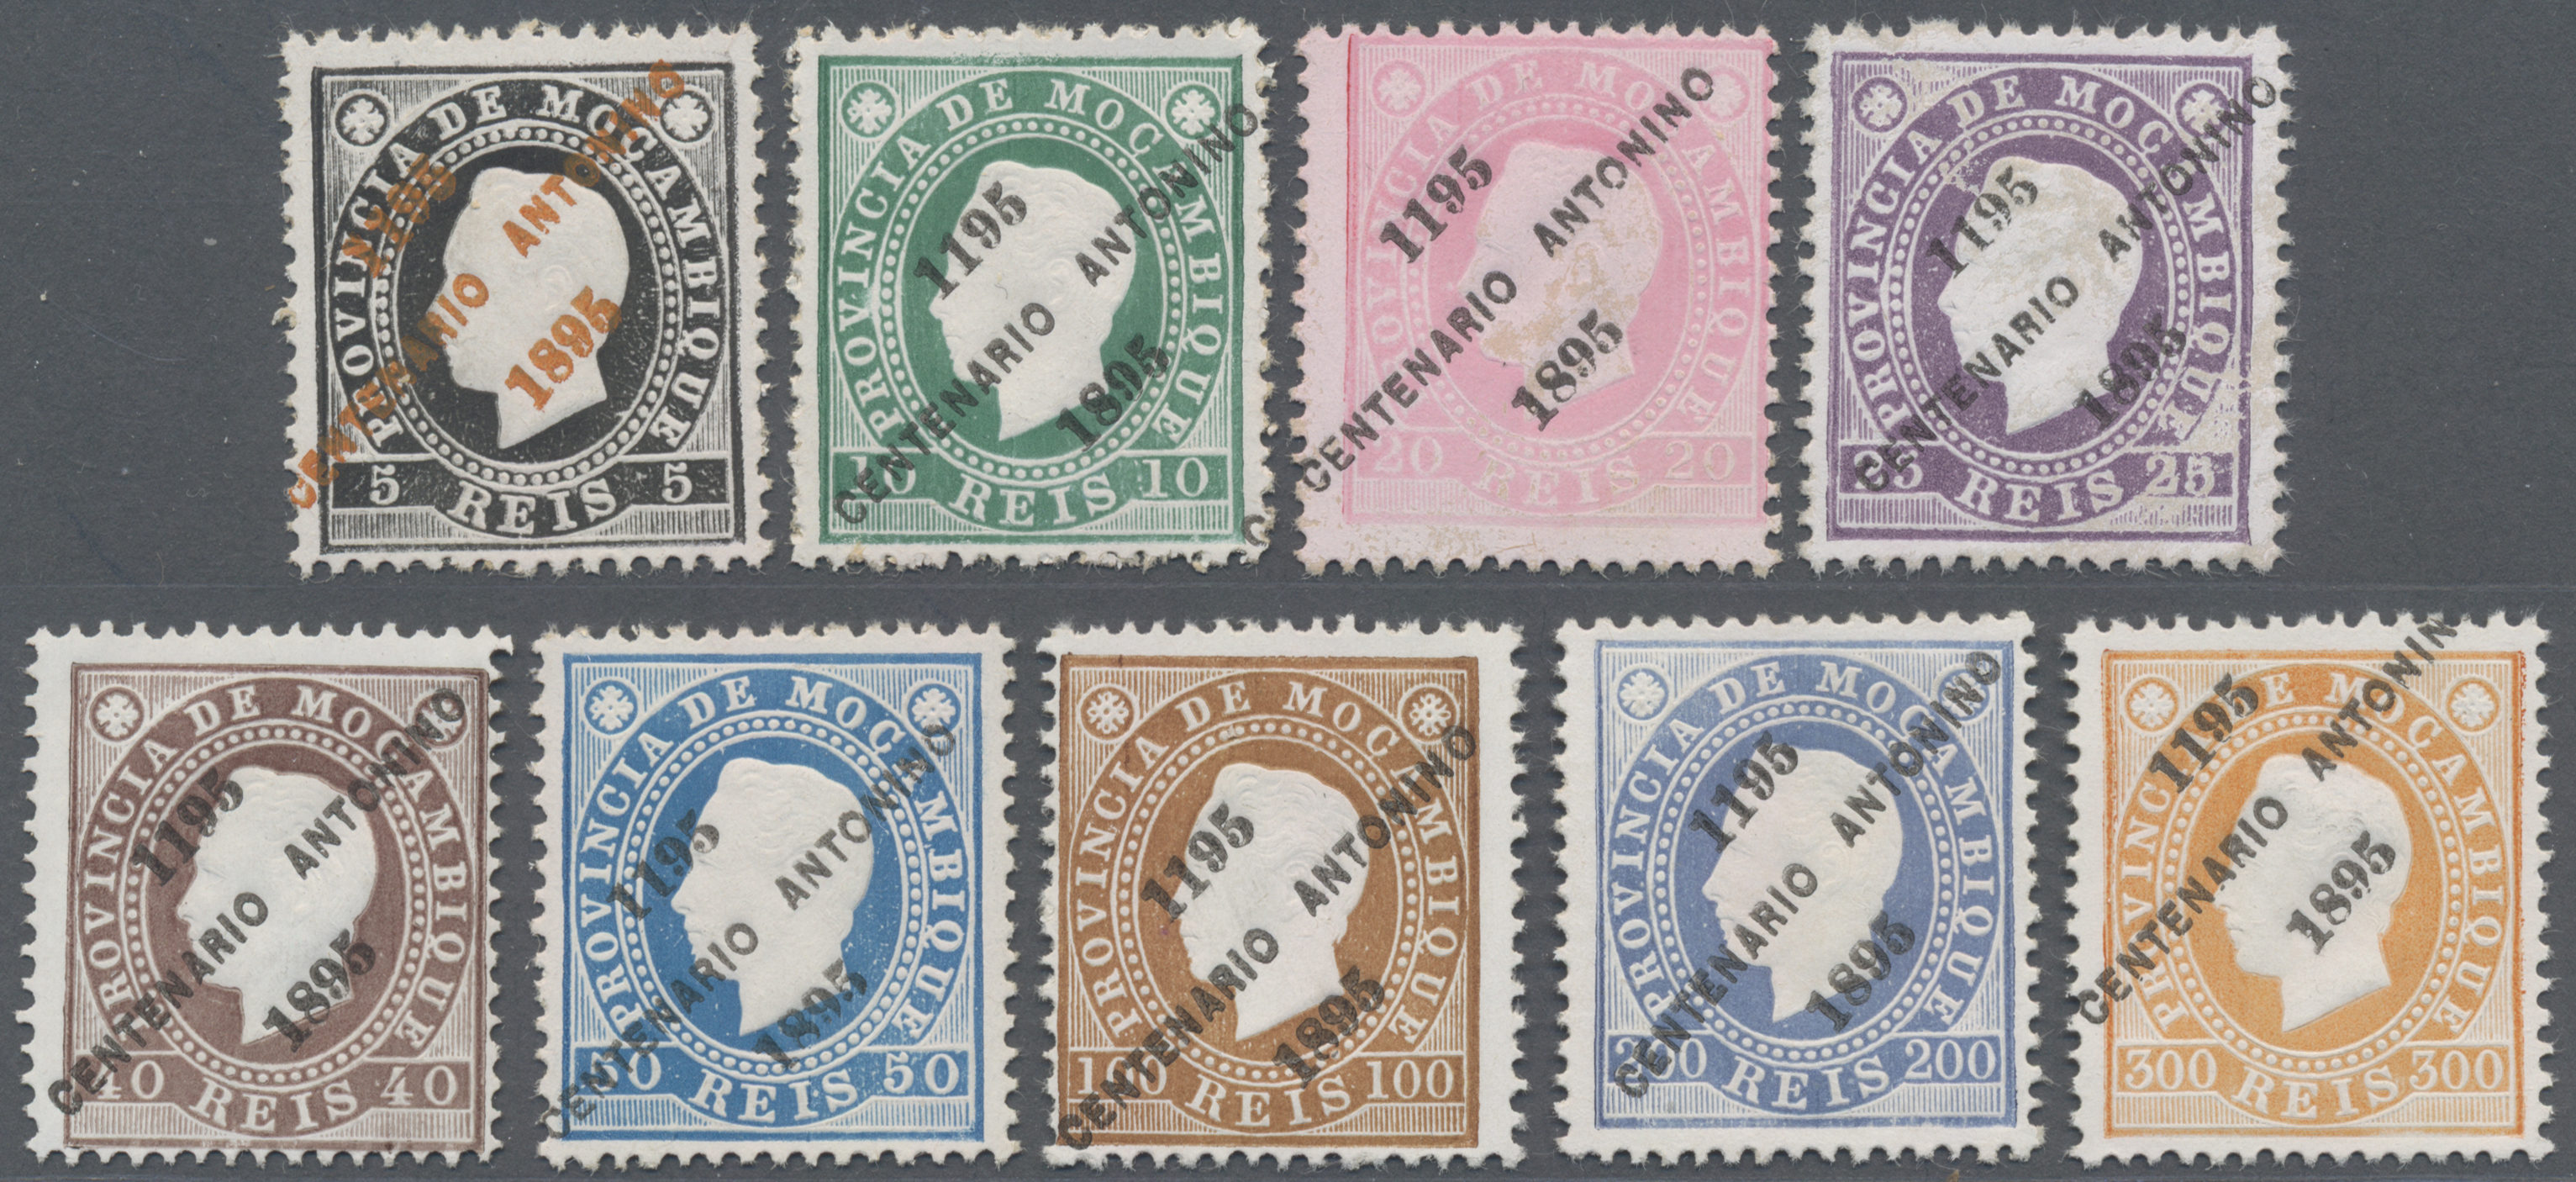 Stamp Auction - mocambique - Sale #45 Collections Worldwide , lot 25517